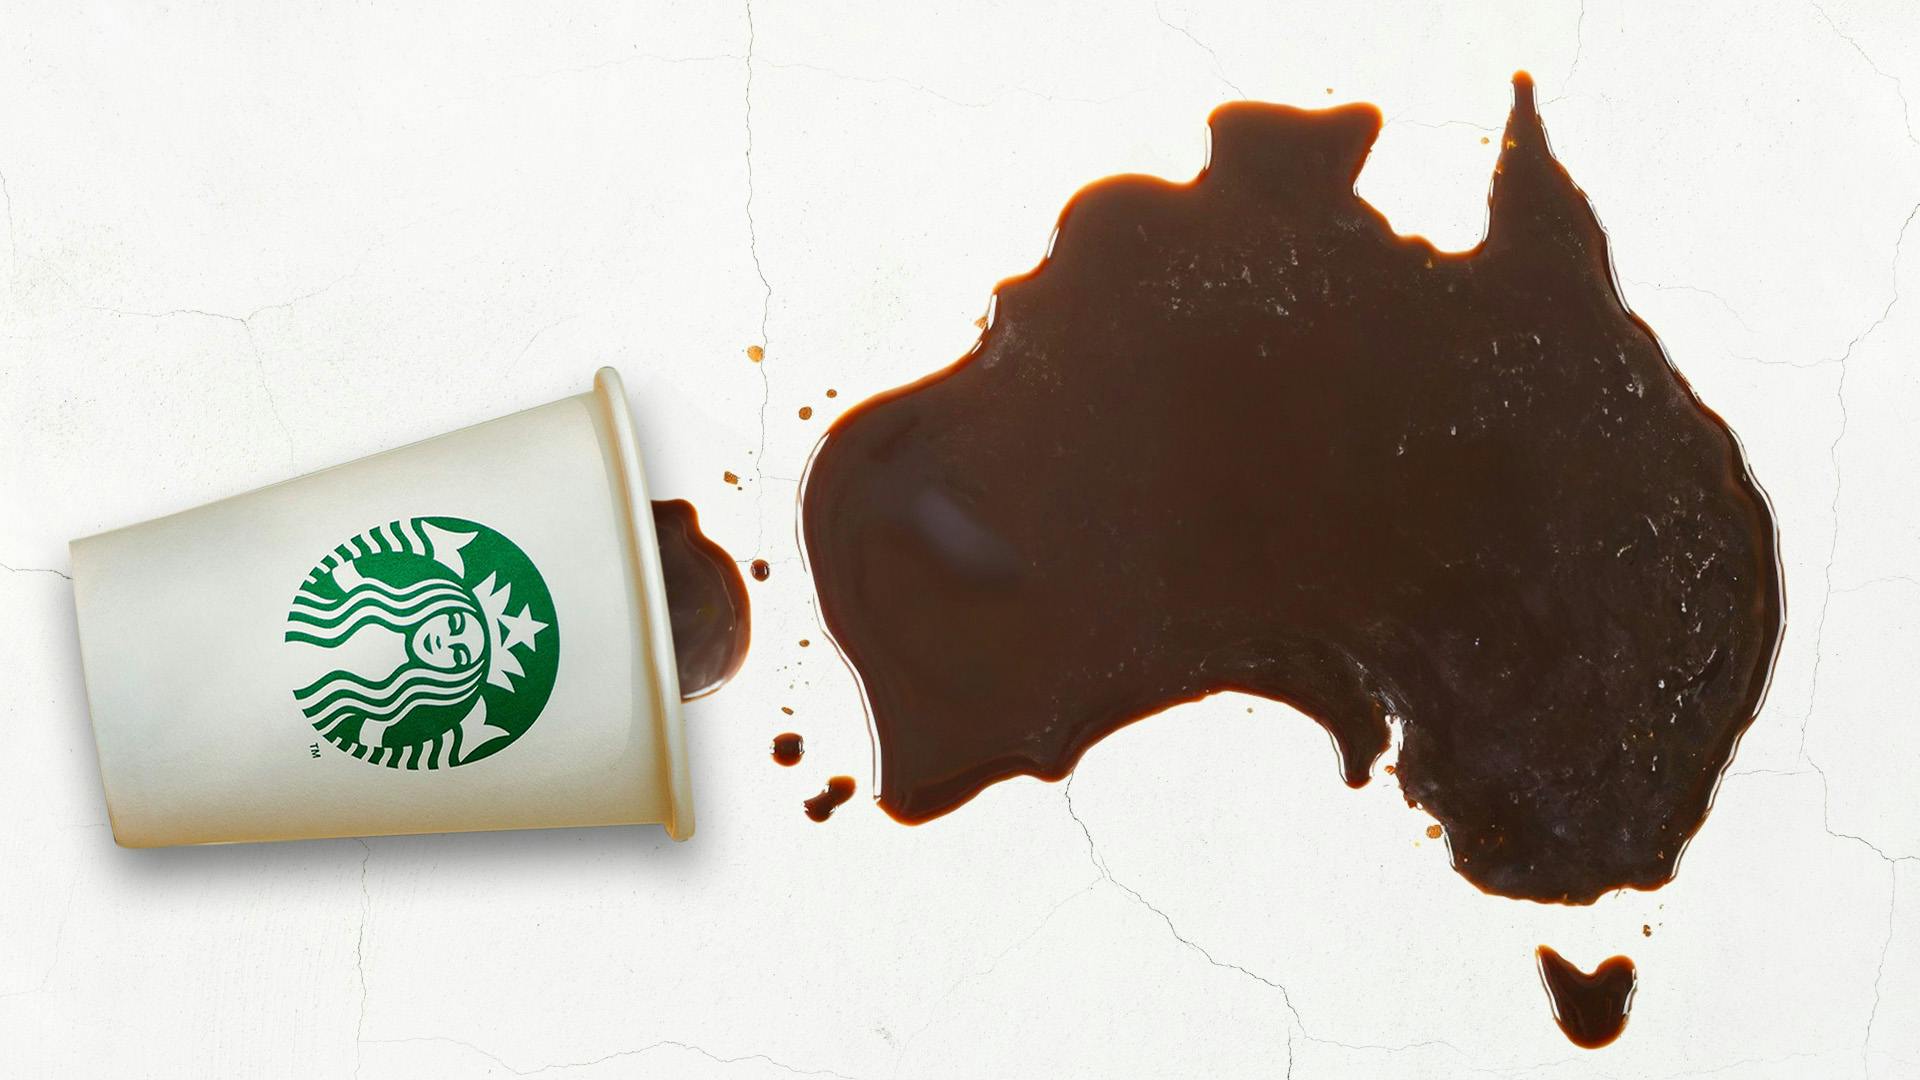 Starbucks Coffee cup spilling into the shape of Australia